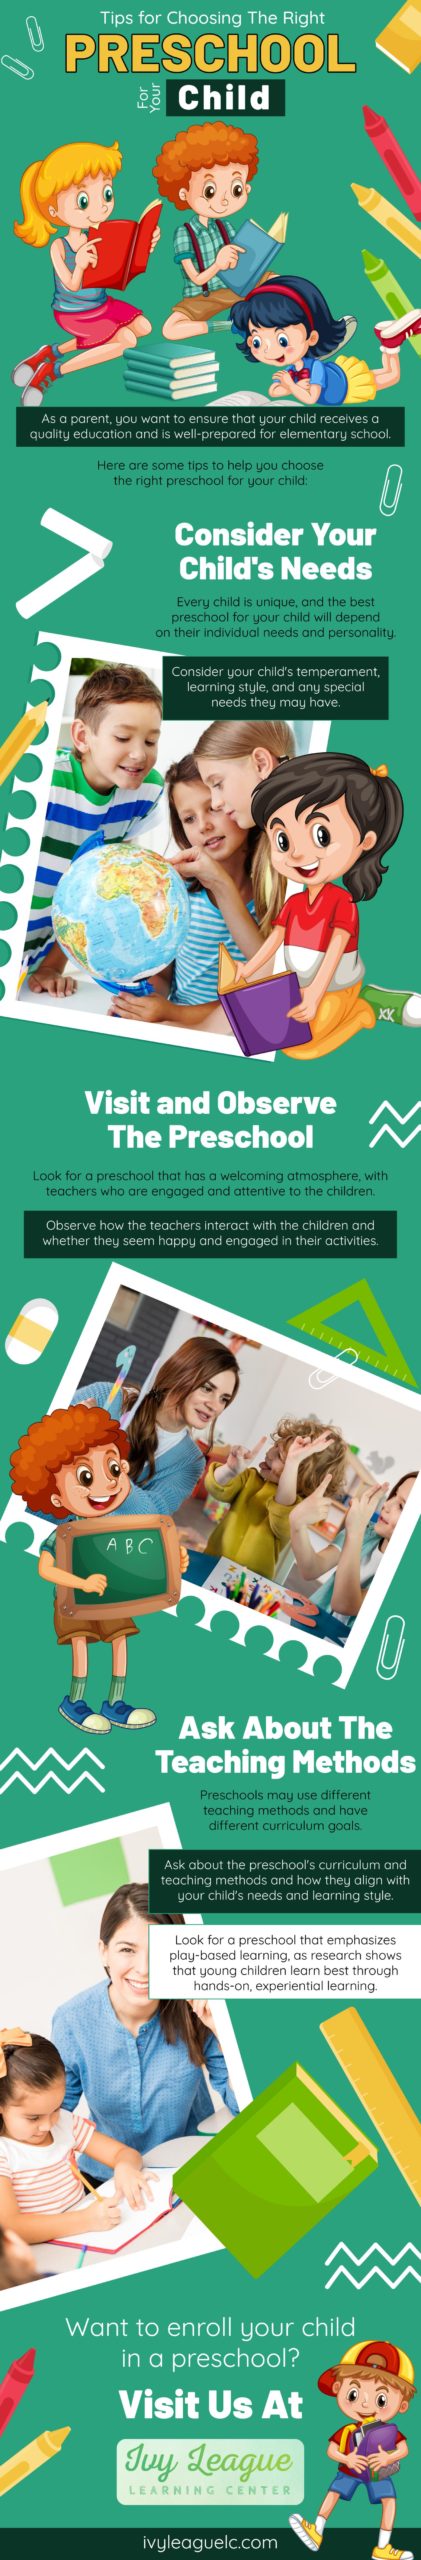 Tips for Choosing The Right PRESCHOOL For Your Child